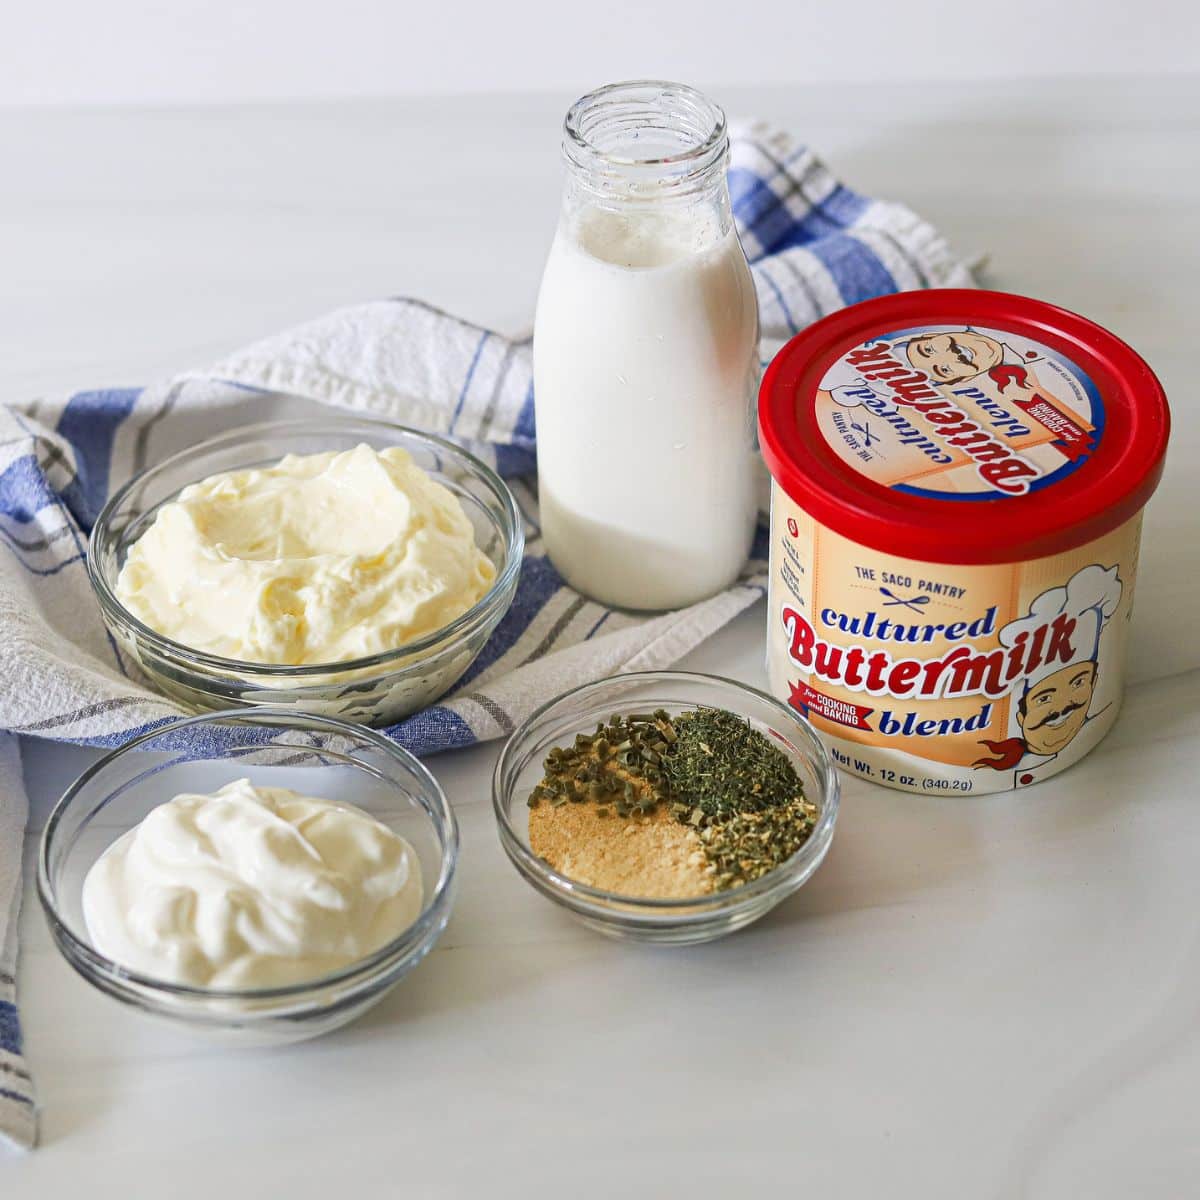 ingredients for homemade ranch dressing including powdered buttermilk, seasonings, sour cream, milk, and mayonnaise.